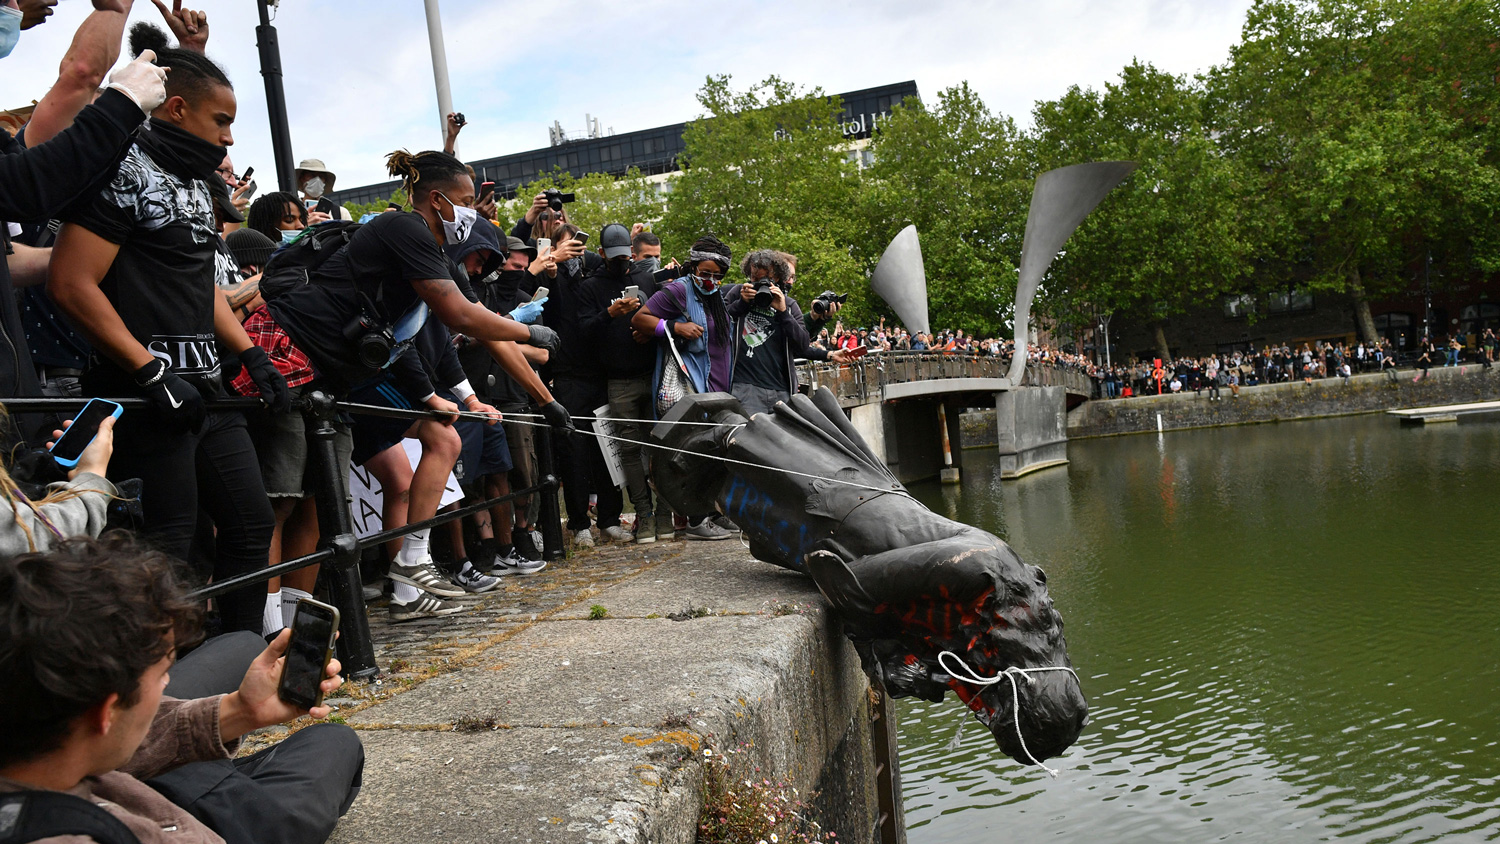 The protesters threw a statue of a slave trader Edward Coulston in Bristol Harbor, during a protest march for a black life in Bristol, England, on June 7.